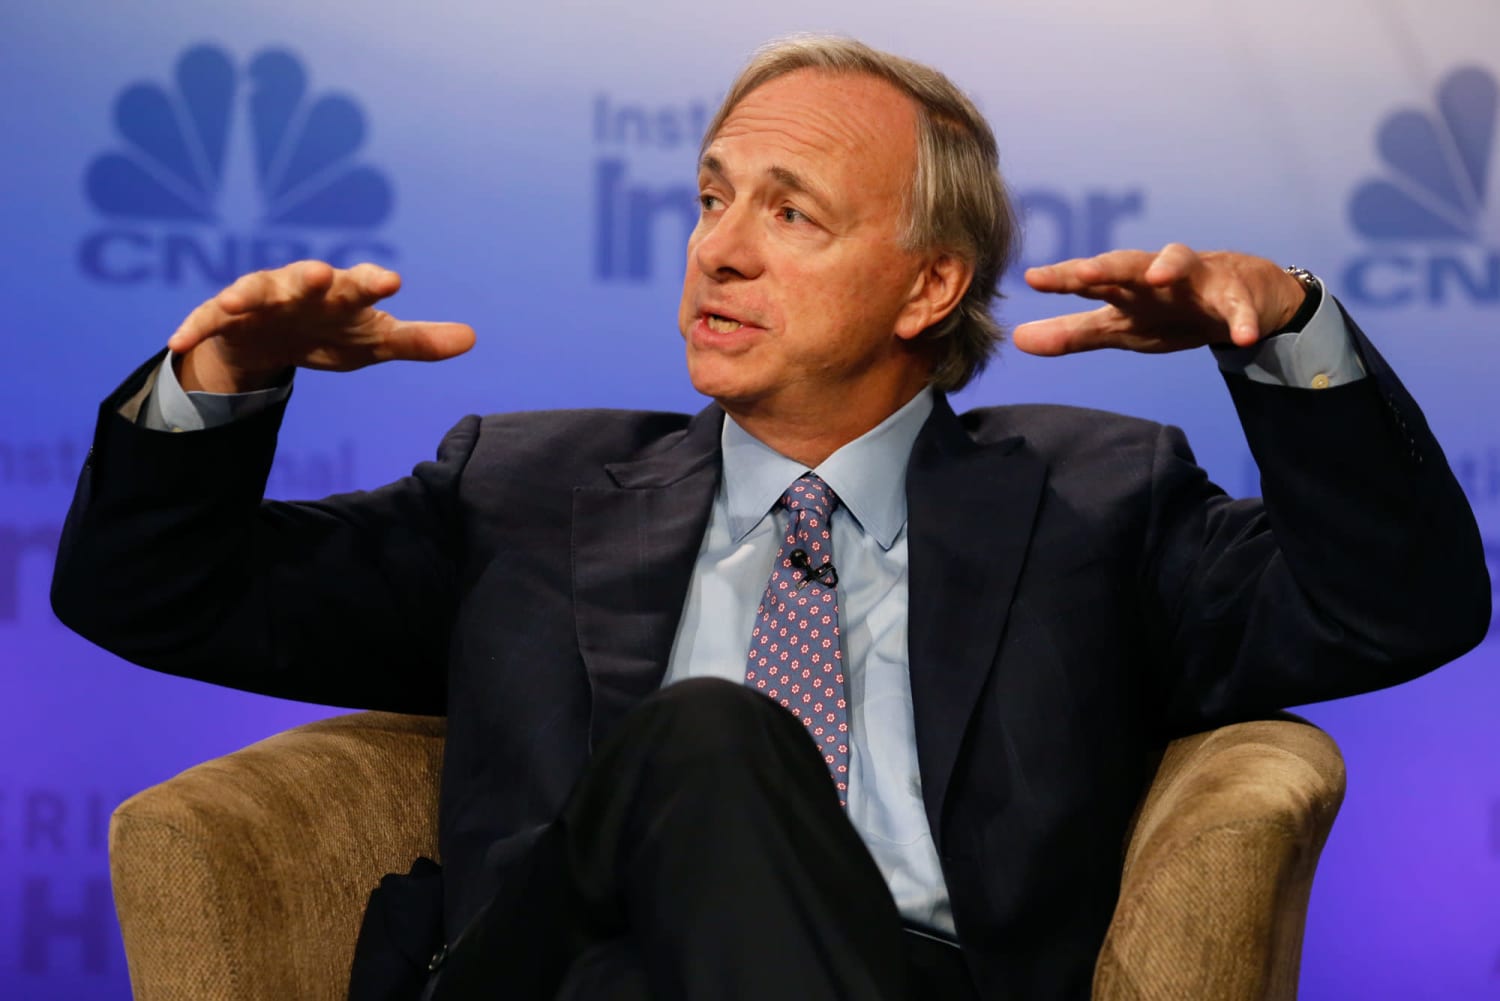 Billionaire Ray Dalio: U.S. economy must change or there will be 'conflict' between the rich and poor